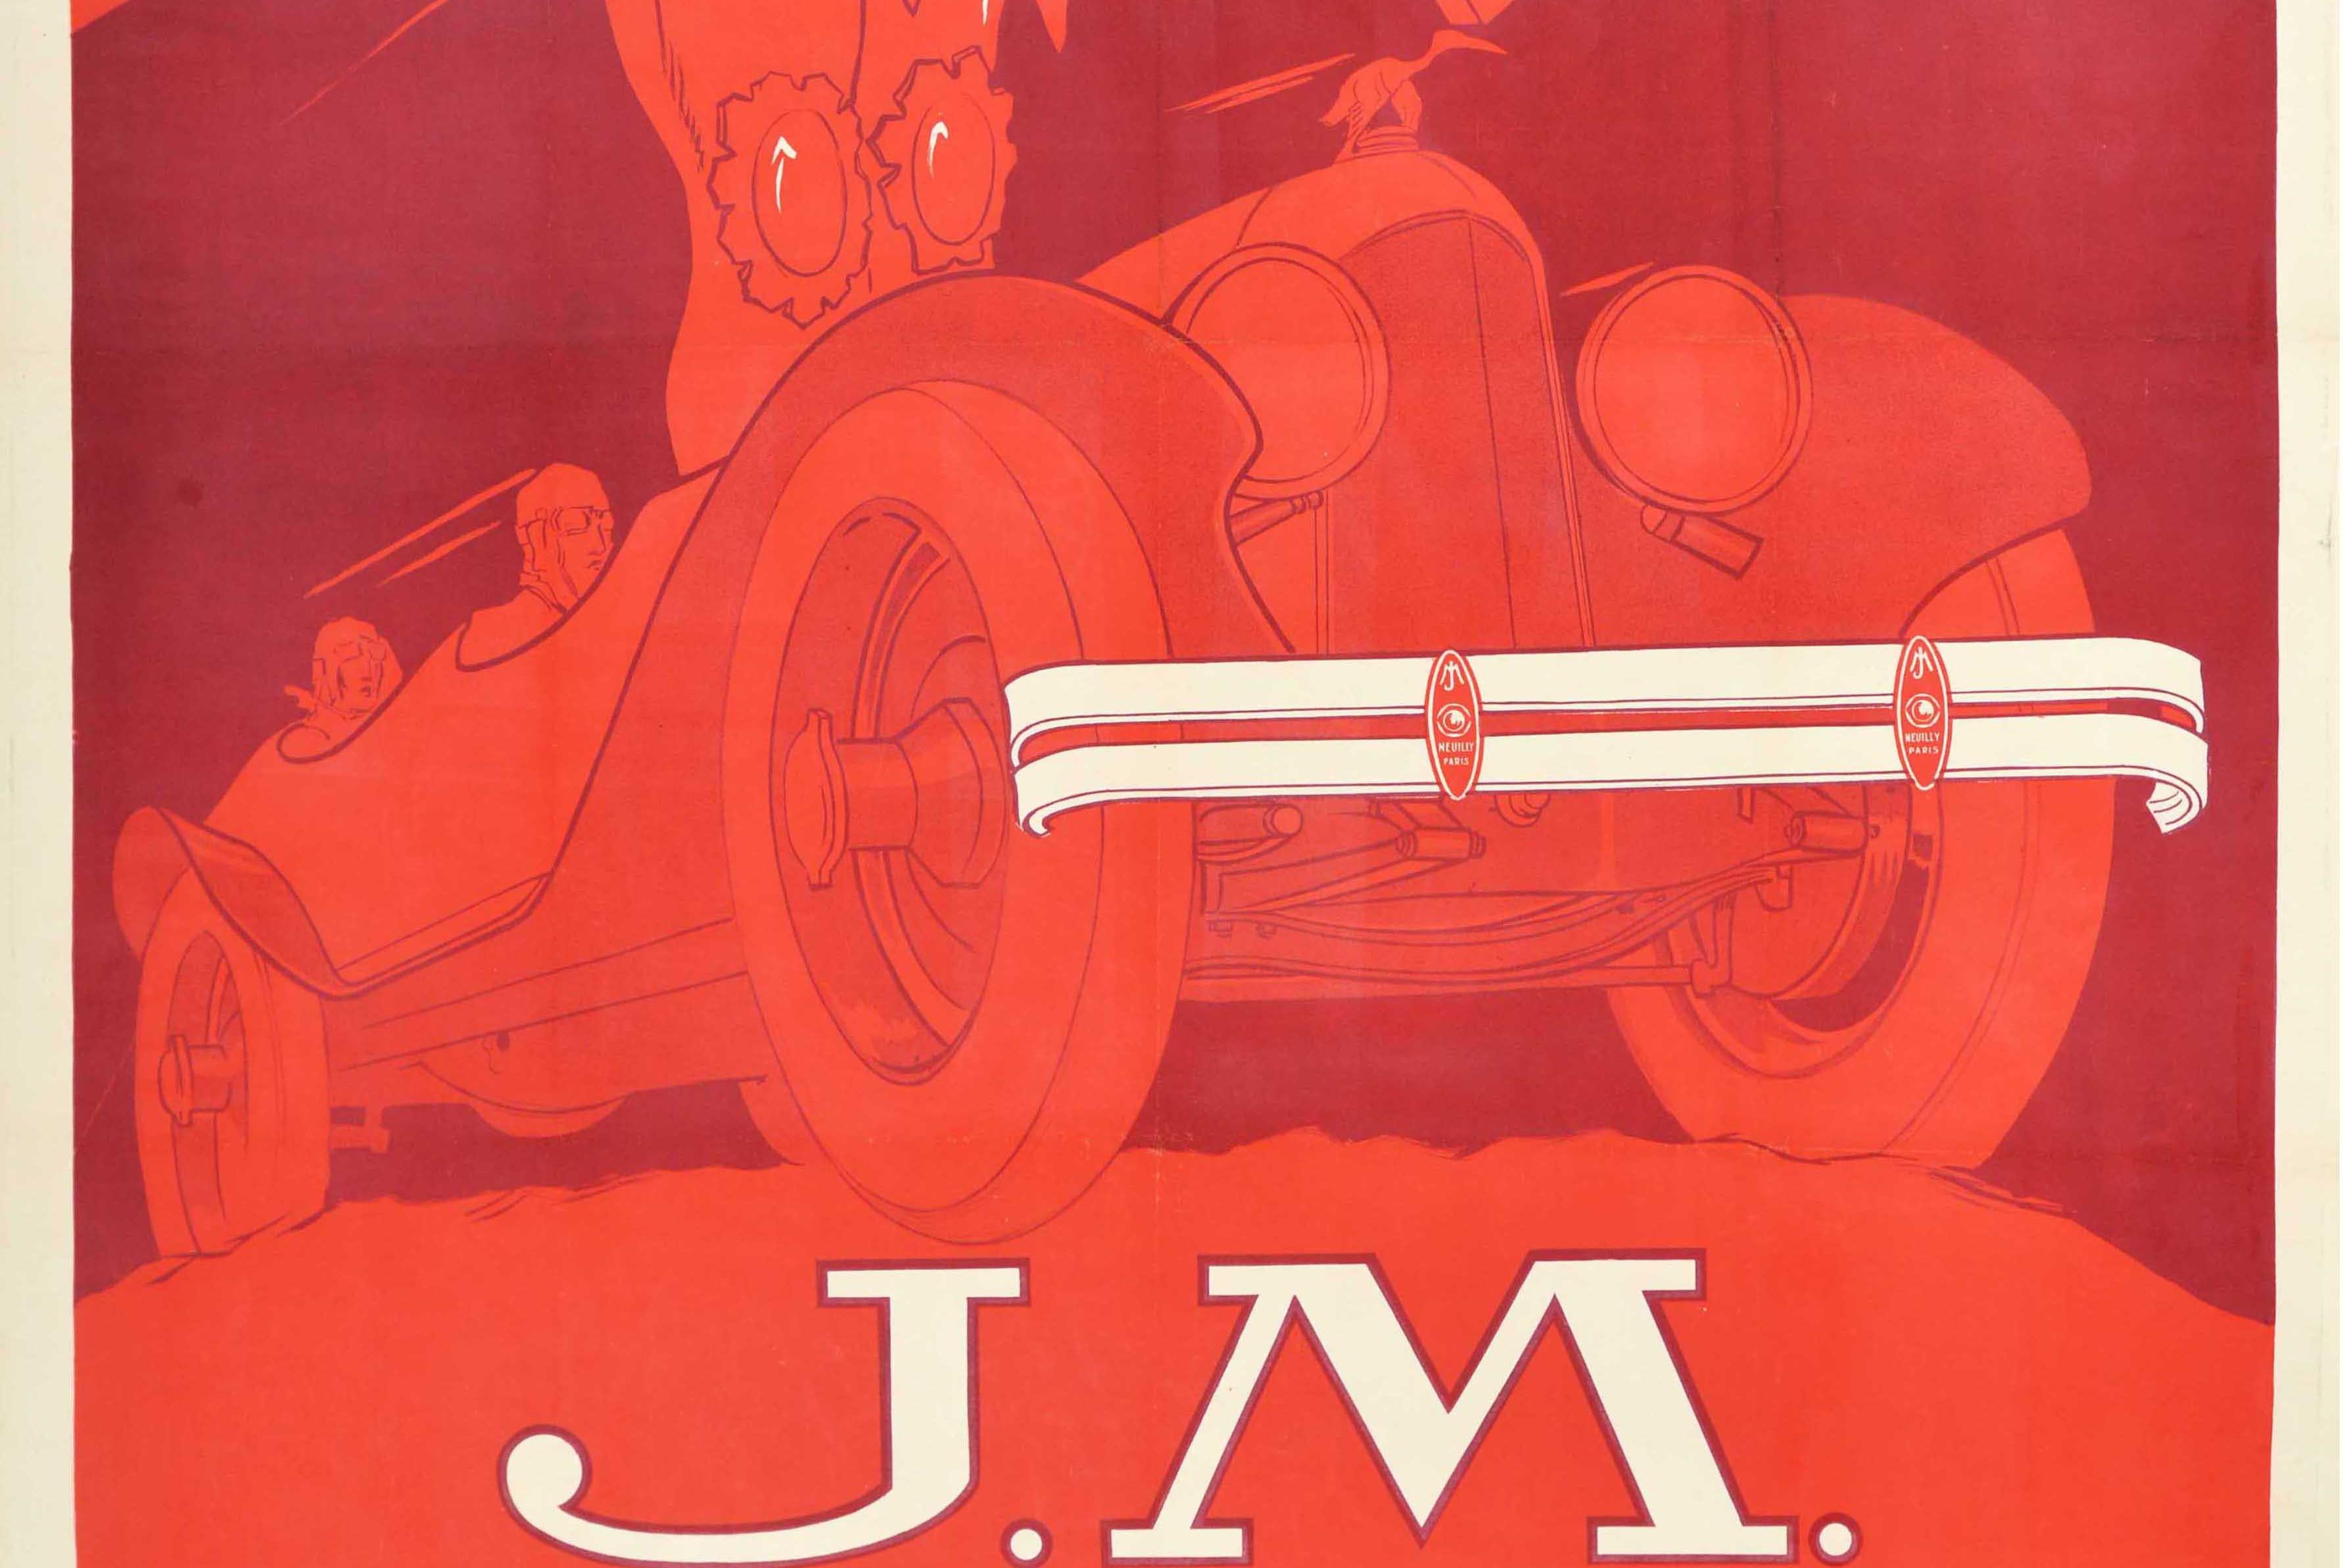 Original antique French poster advertising JM shock absorbers as the shield of the car - Le Bouclier de la Voiture J.M. Pare-Choc Amortisseur - featuring a stunning Art Deco design depicting a knight in armour holding a lance and a shield marked JM